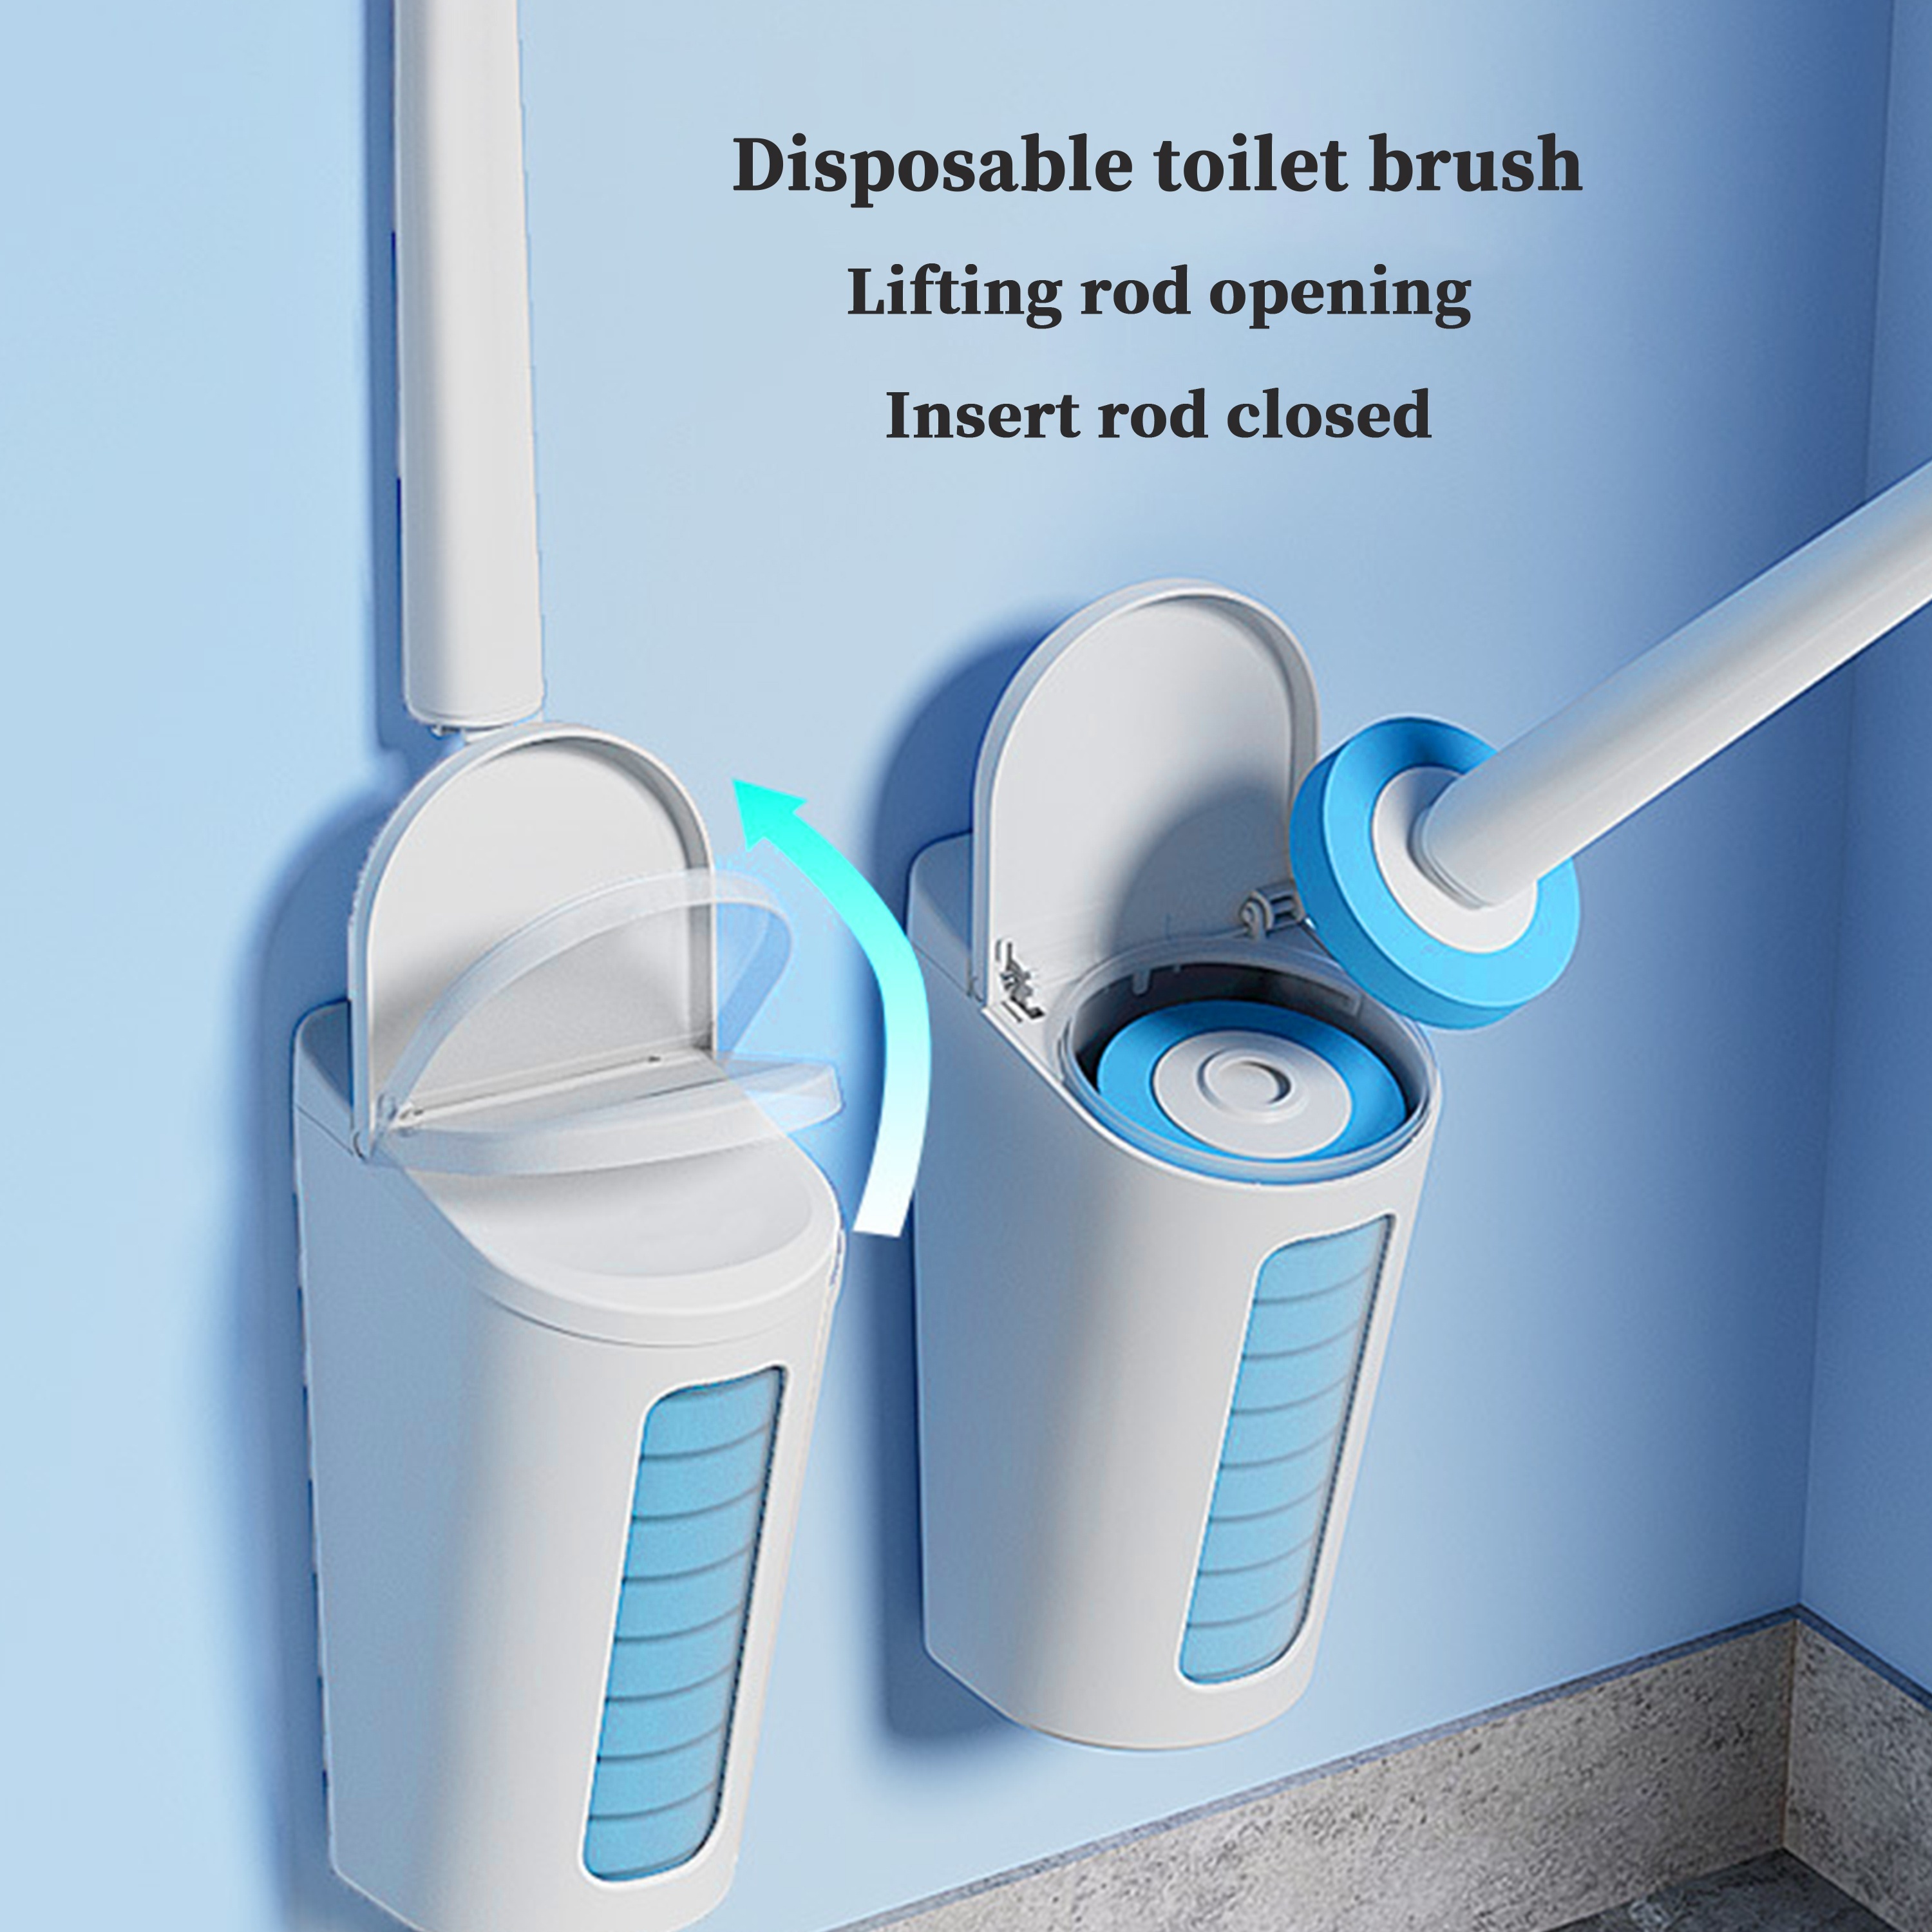 Disposable Toilet Brush with Holder. Disposable Toilet Cleaning System with  8 Toilet Wand Replacement Heads